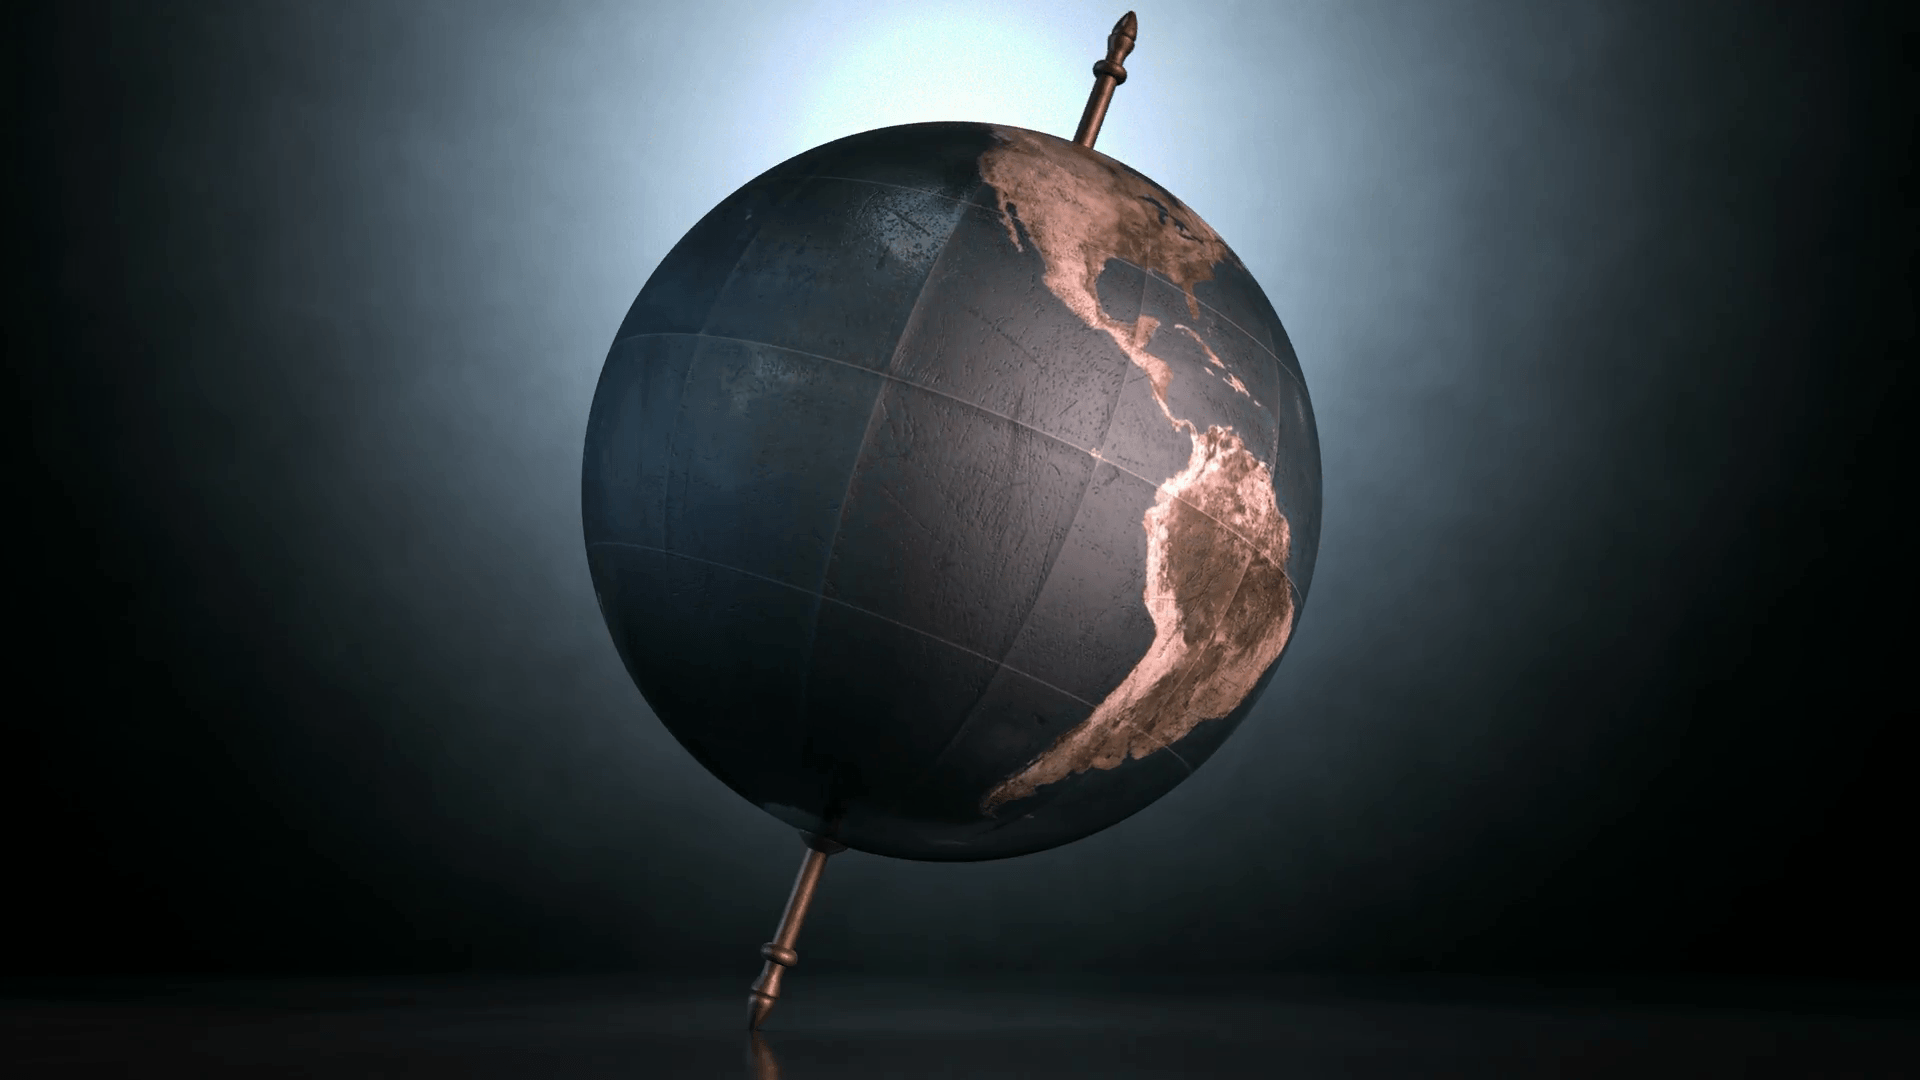 A static view of a world globe ornament spinning on a tilted axis